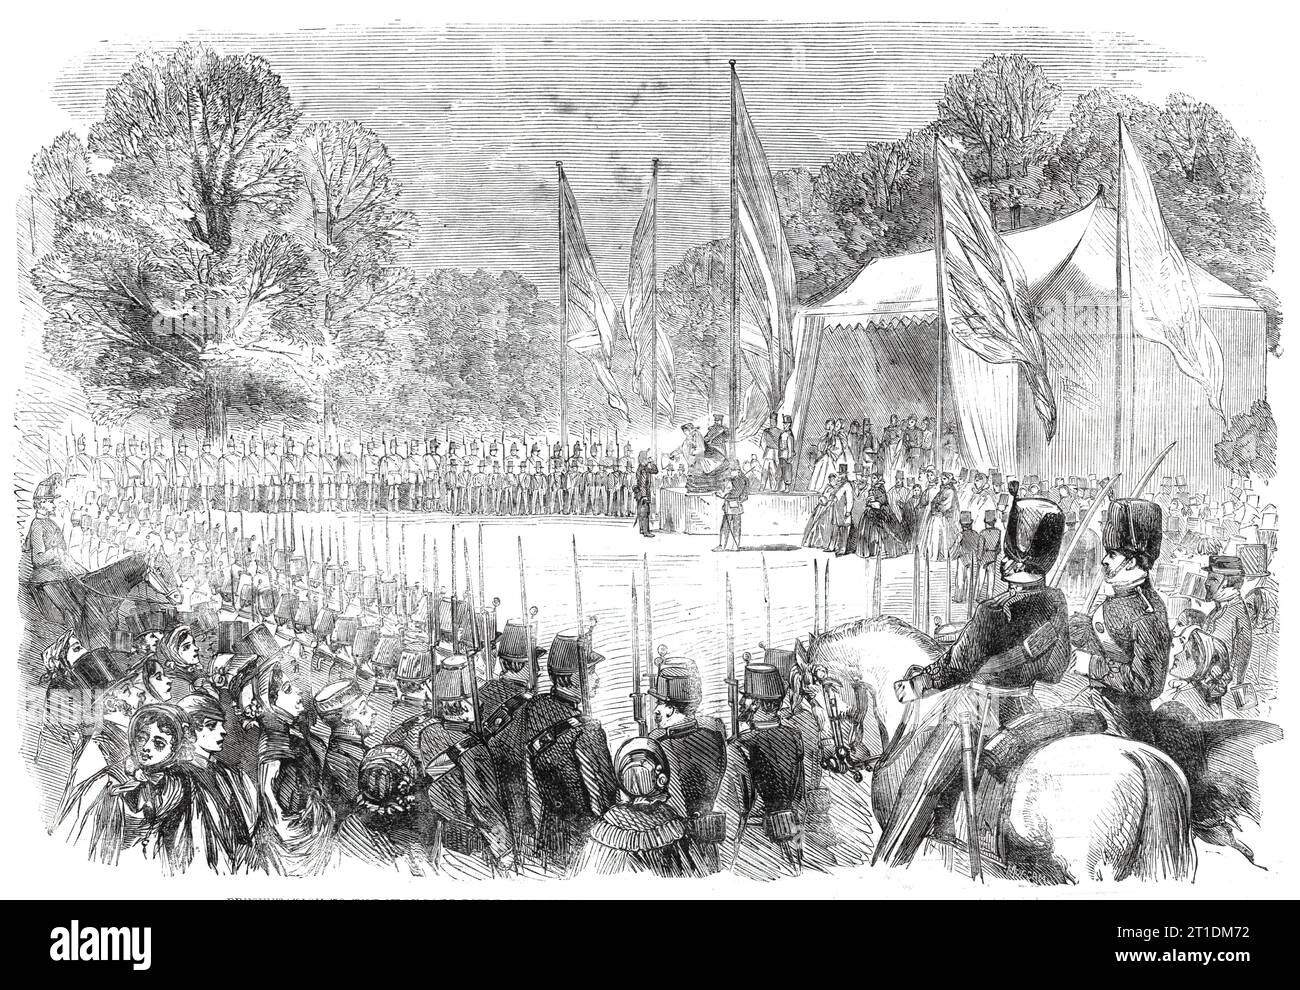 Presentation to the Highgate Rifle Corps of a silver bugle by Miss Burdet Coutts, at Holly Lodge, Highgate, 1860. 'The company having taken their seats, the battalion marched up in column, and, on arriving within a short distance of the presentation tent,...formed into line...the band of the North Middlesex Rifles stationed in the rear playing &quot;Rule Britannia.&quot; Miss Burdett Coutts then came forward to the front of the platform, to present the bugle, amidst the enthusiastic cheering of the vast concourse of persons assembled, and addressed the volunteers...: &quot;The ladies of Highga Stock Photo